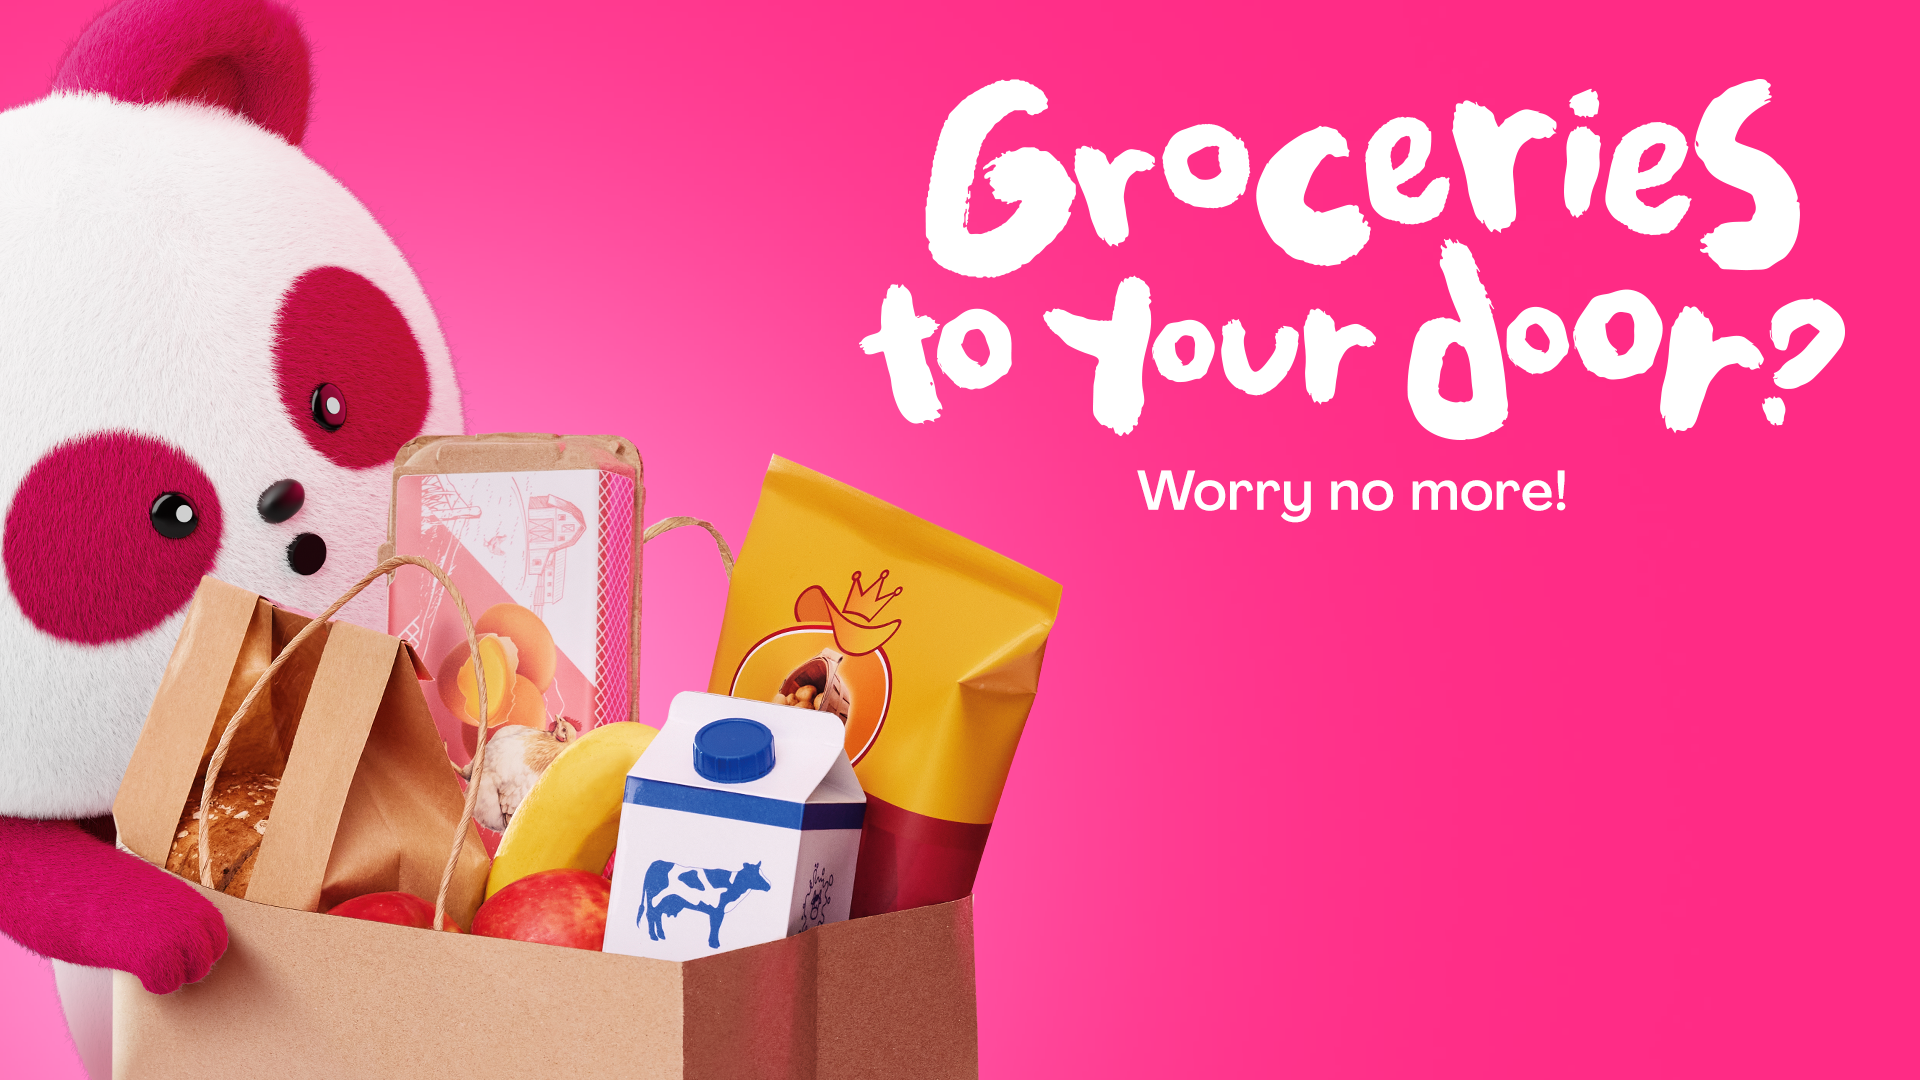 “foodpanda Makes It Easy to Feed Your Cravings”